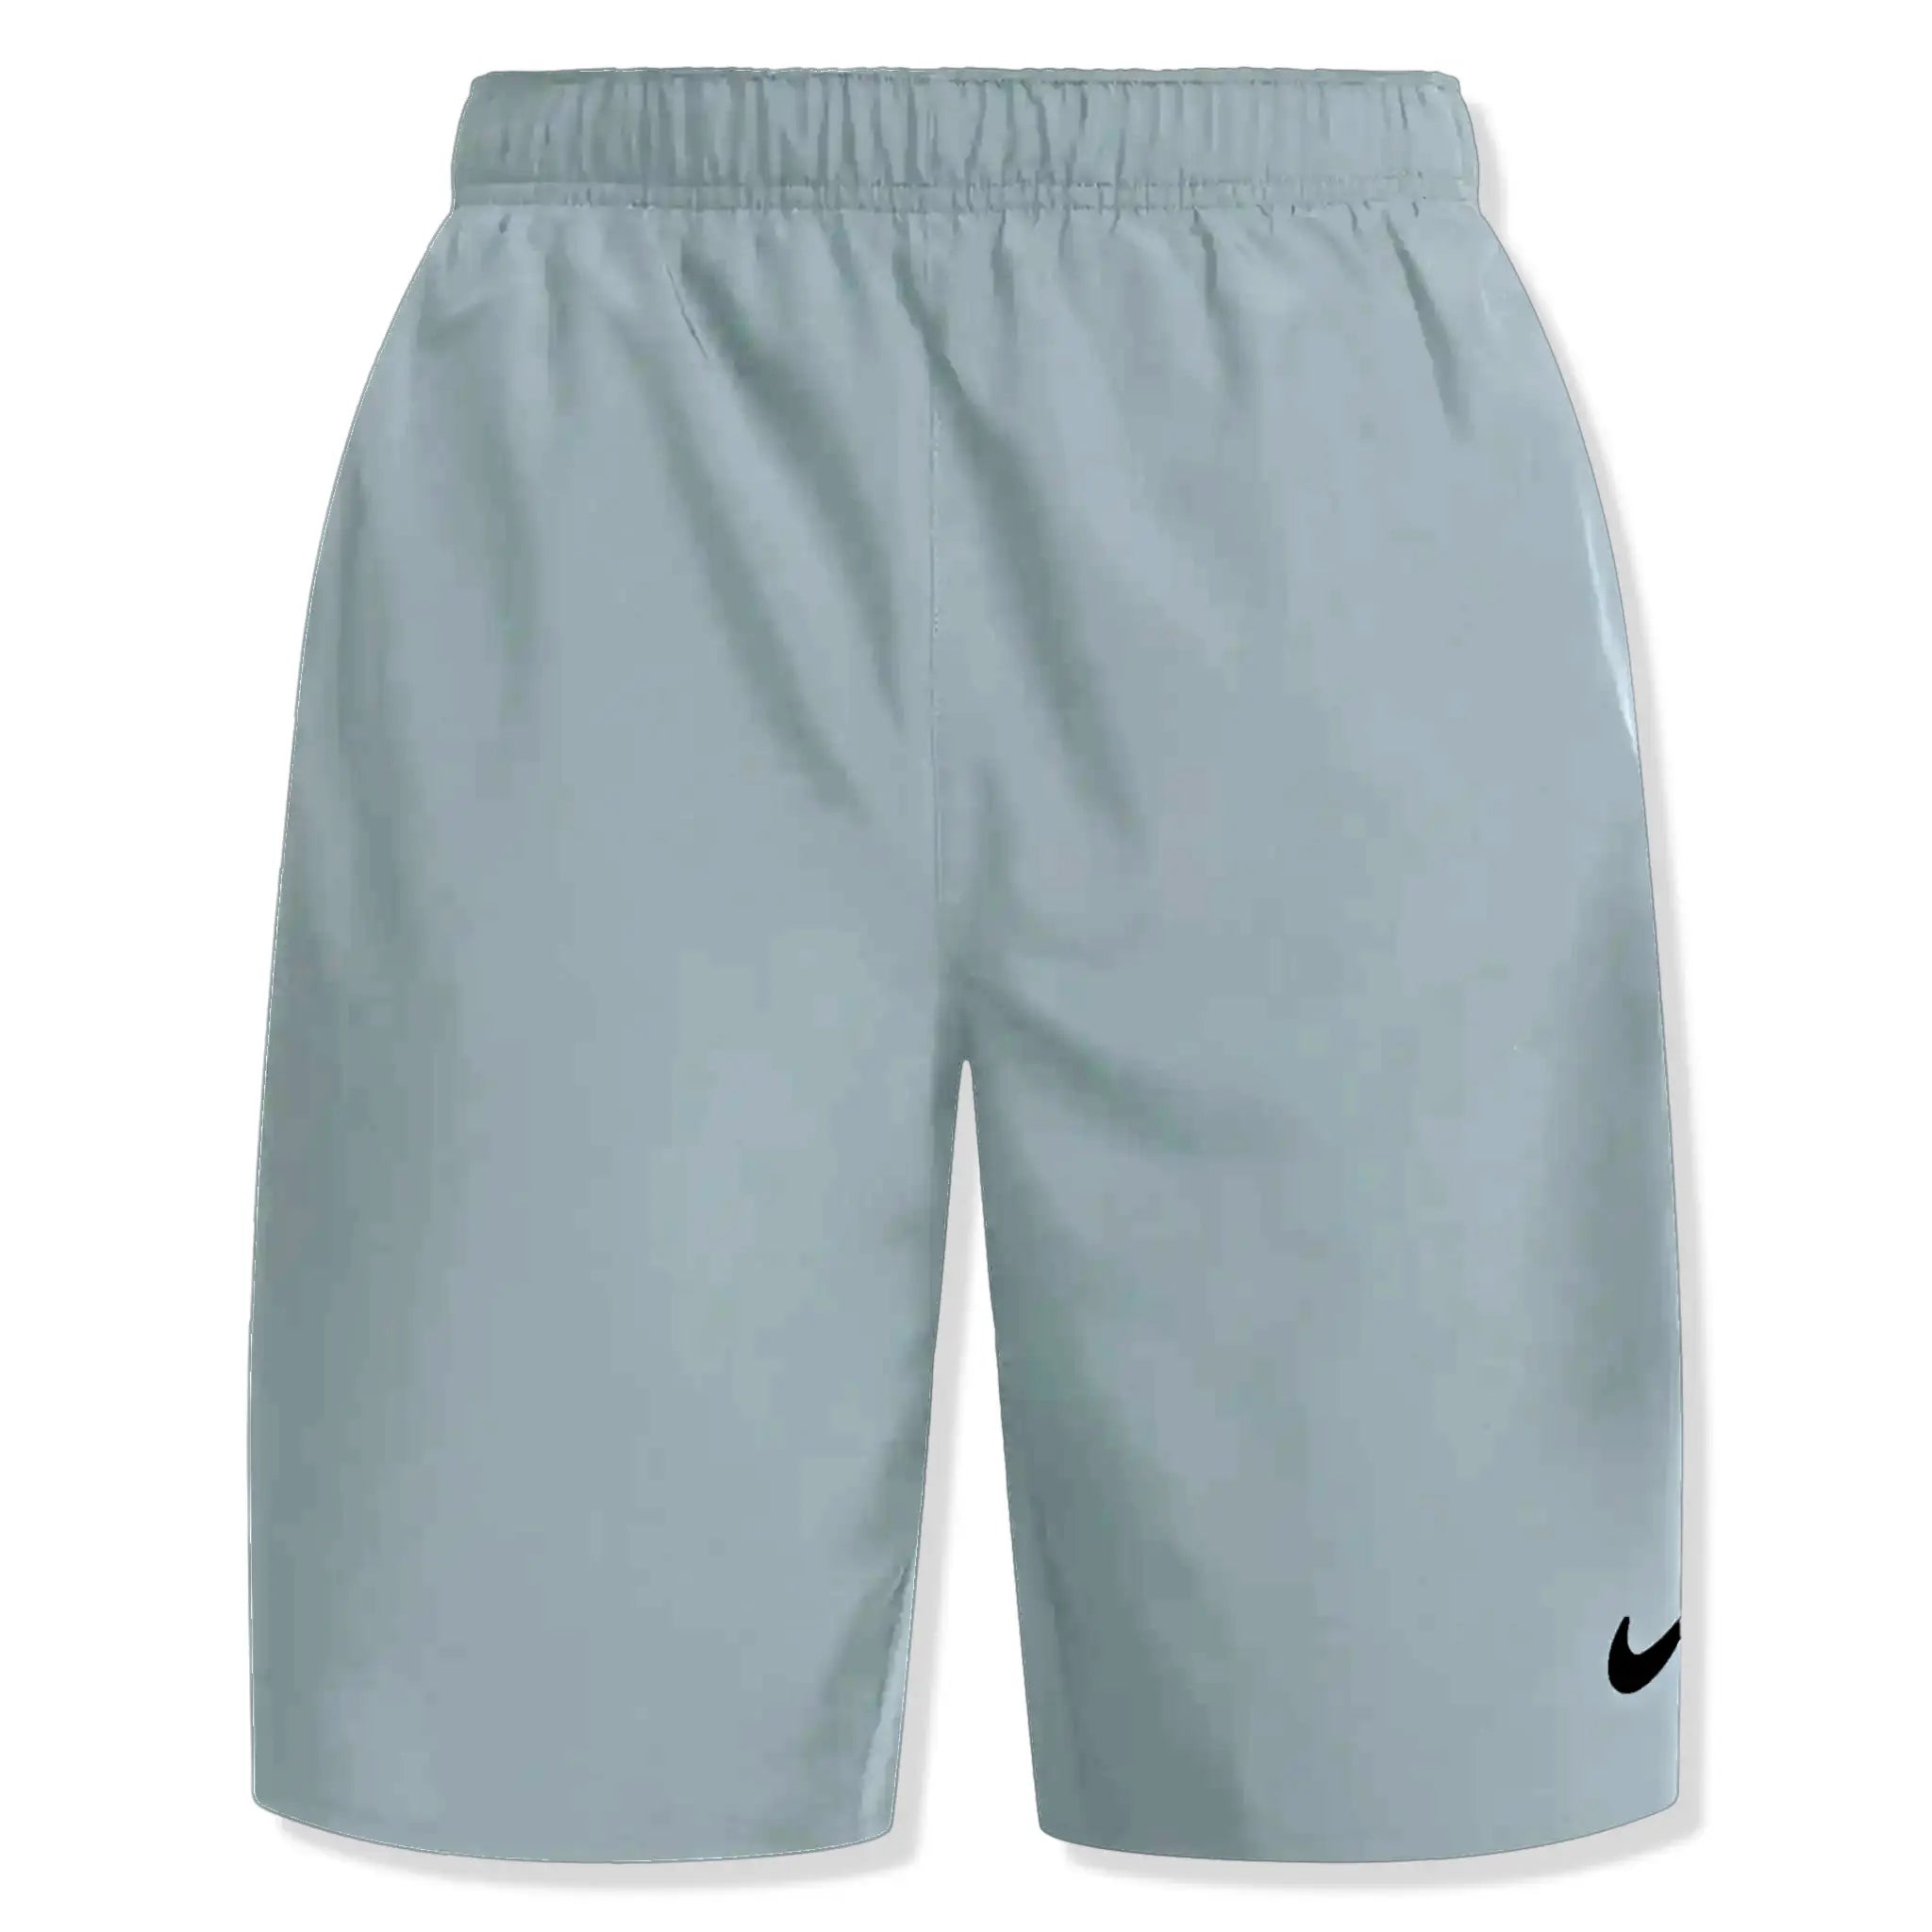 Front view of Nike Dri-FIT Grey Training Shorts DM6618-084